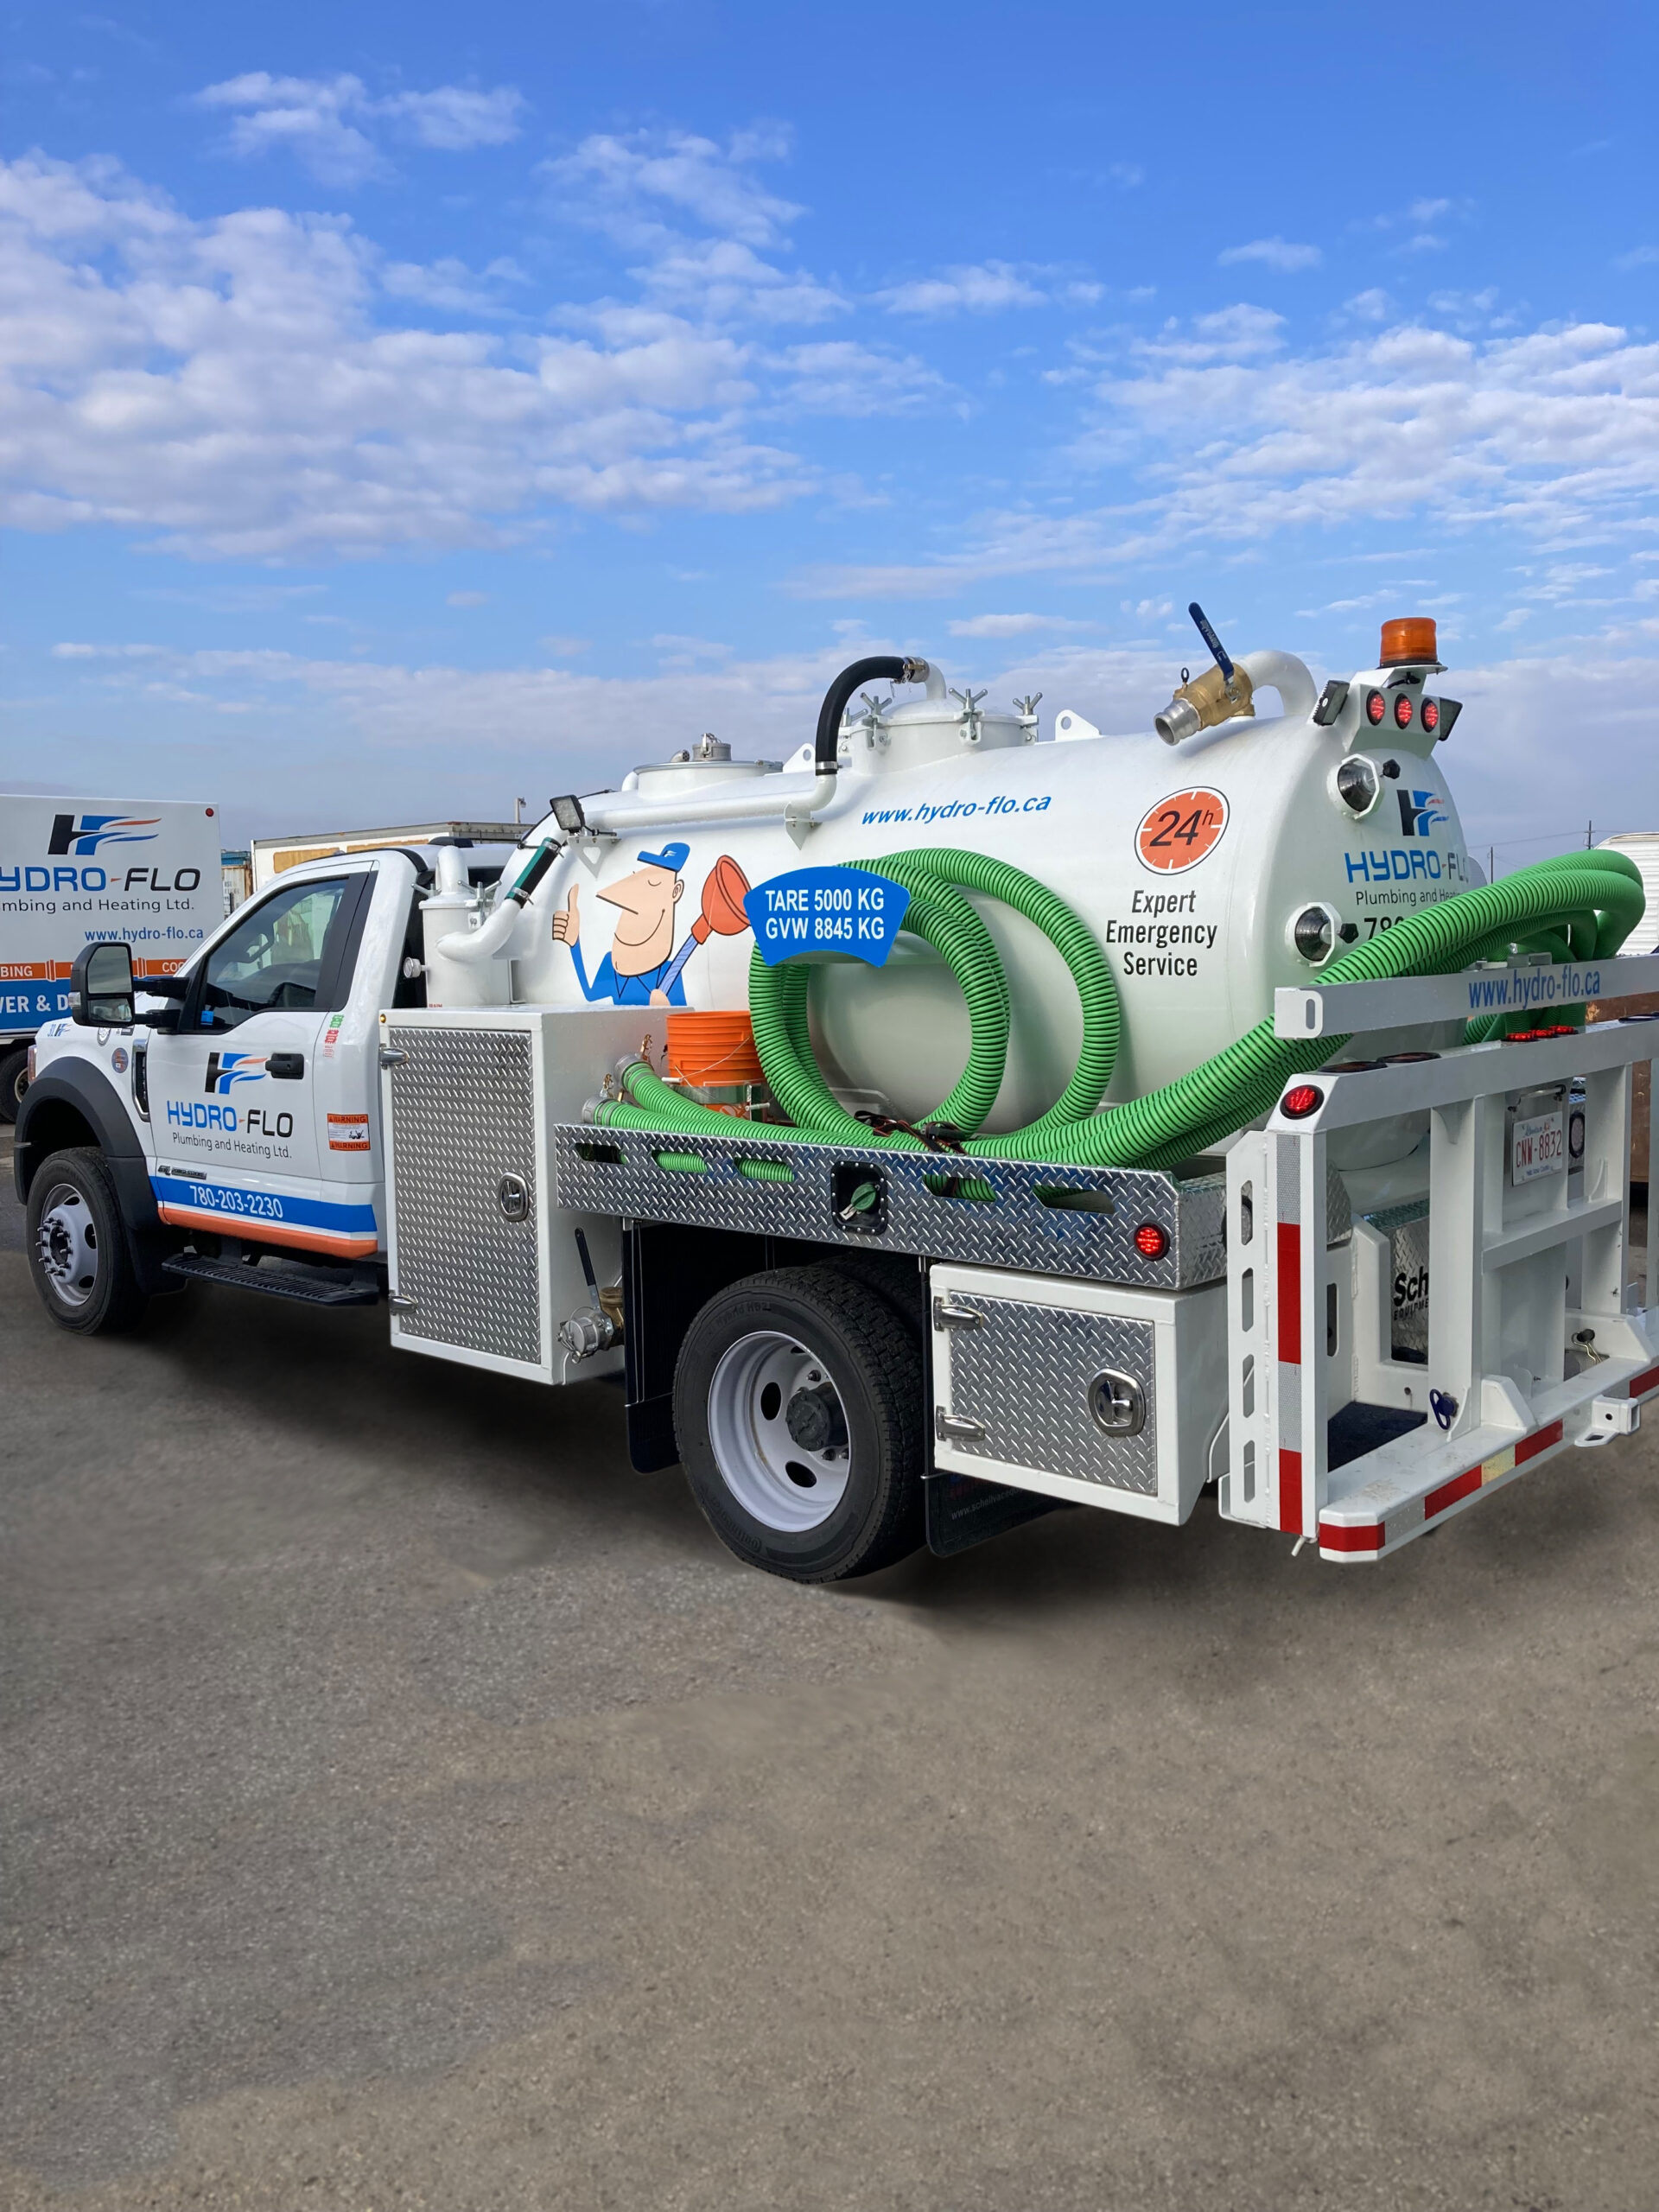 Sewer Vac Services in Edmonton, AB by Hydro-Flo